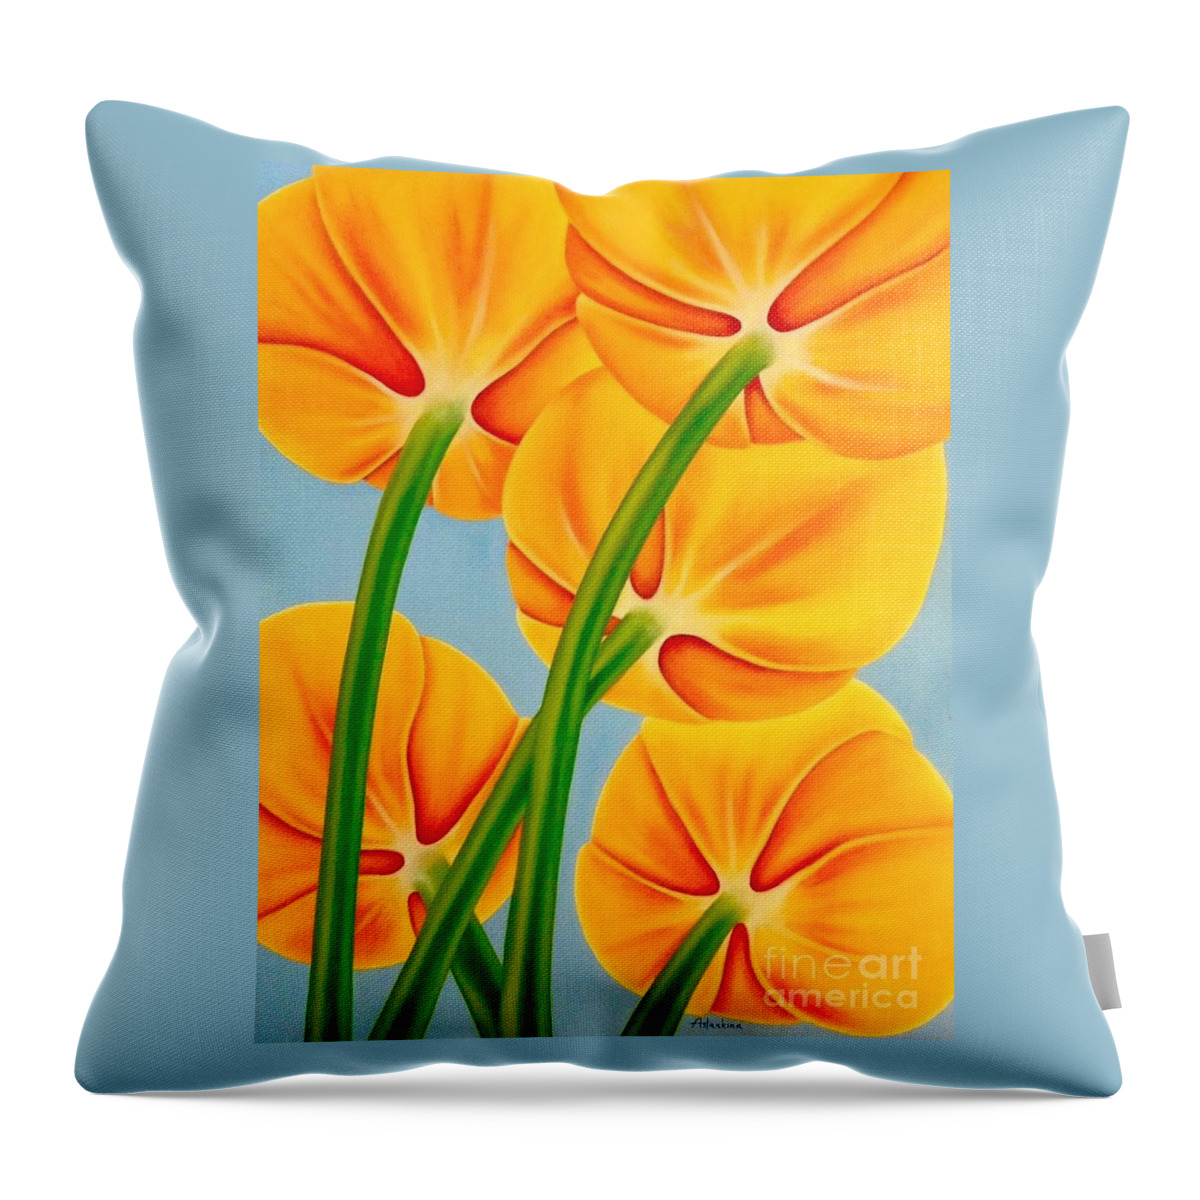 Tulips Throw Pillow featuring the painting Tangerine by Natalia Astankina